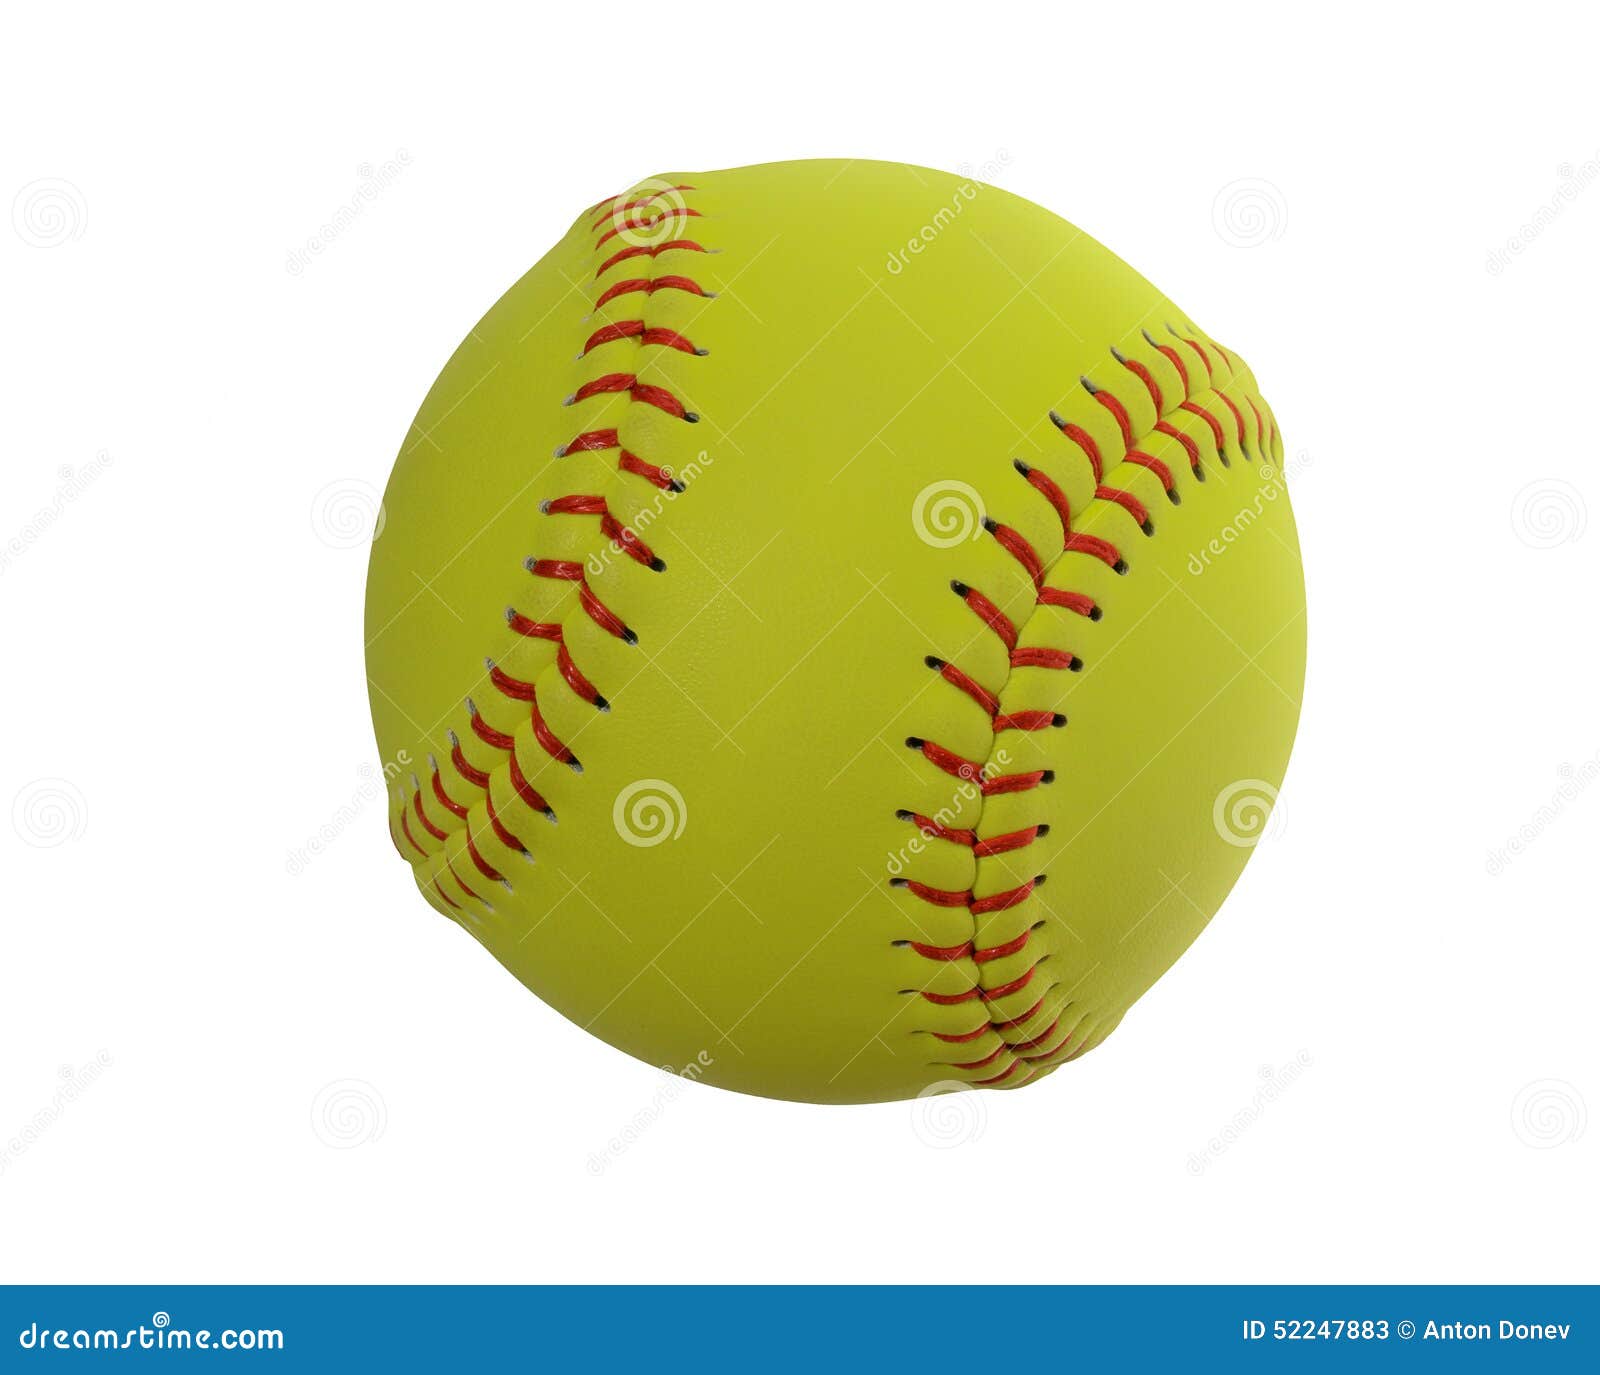 clipart backgrounds softball - photo #15